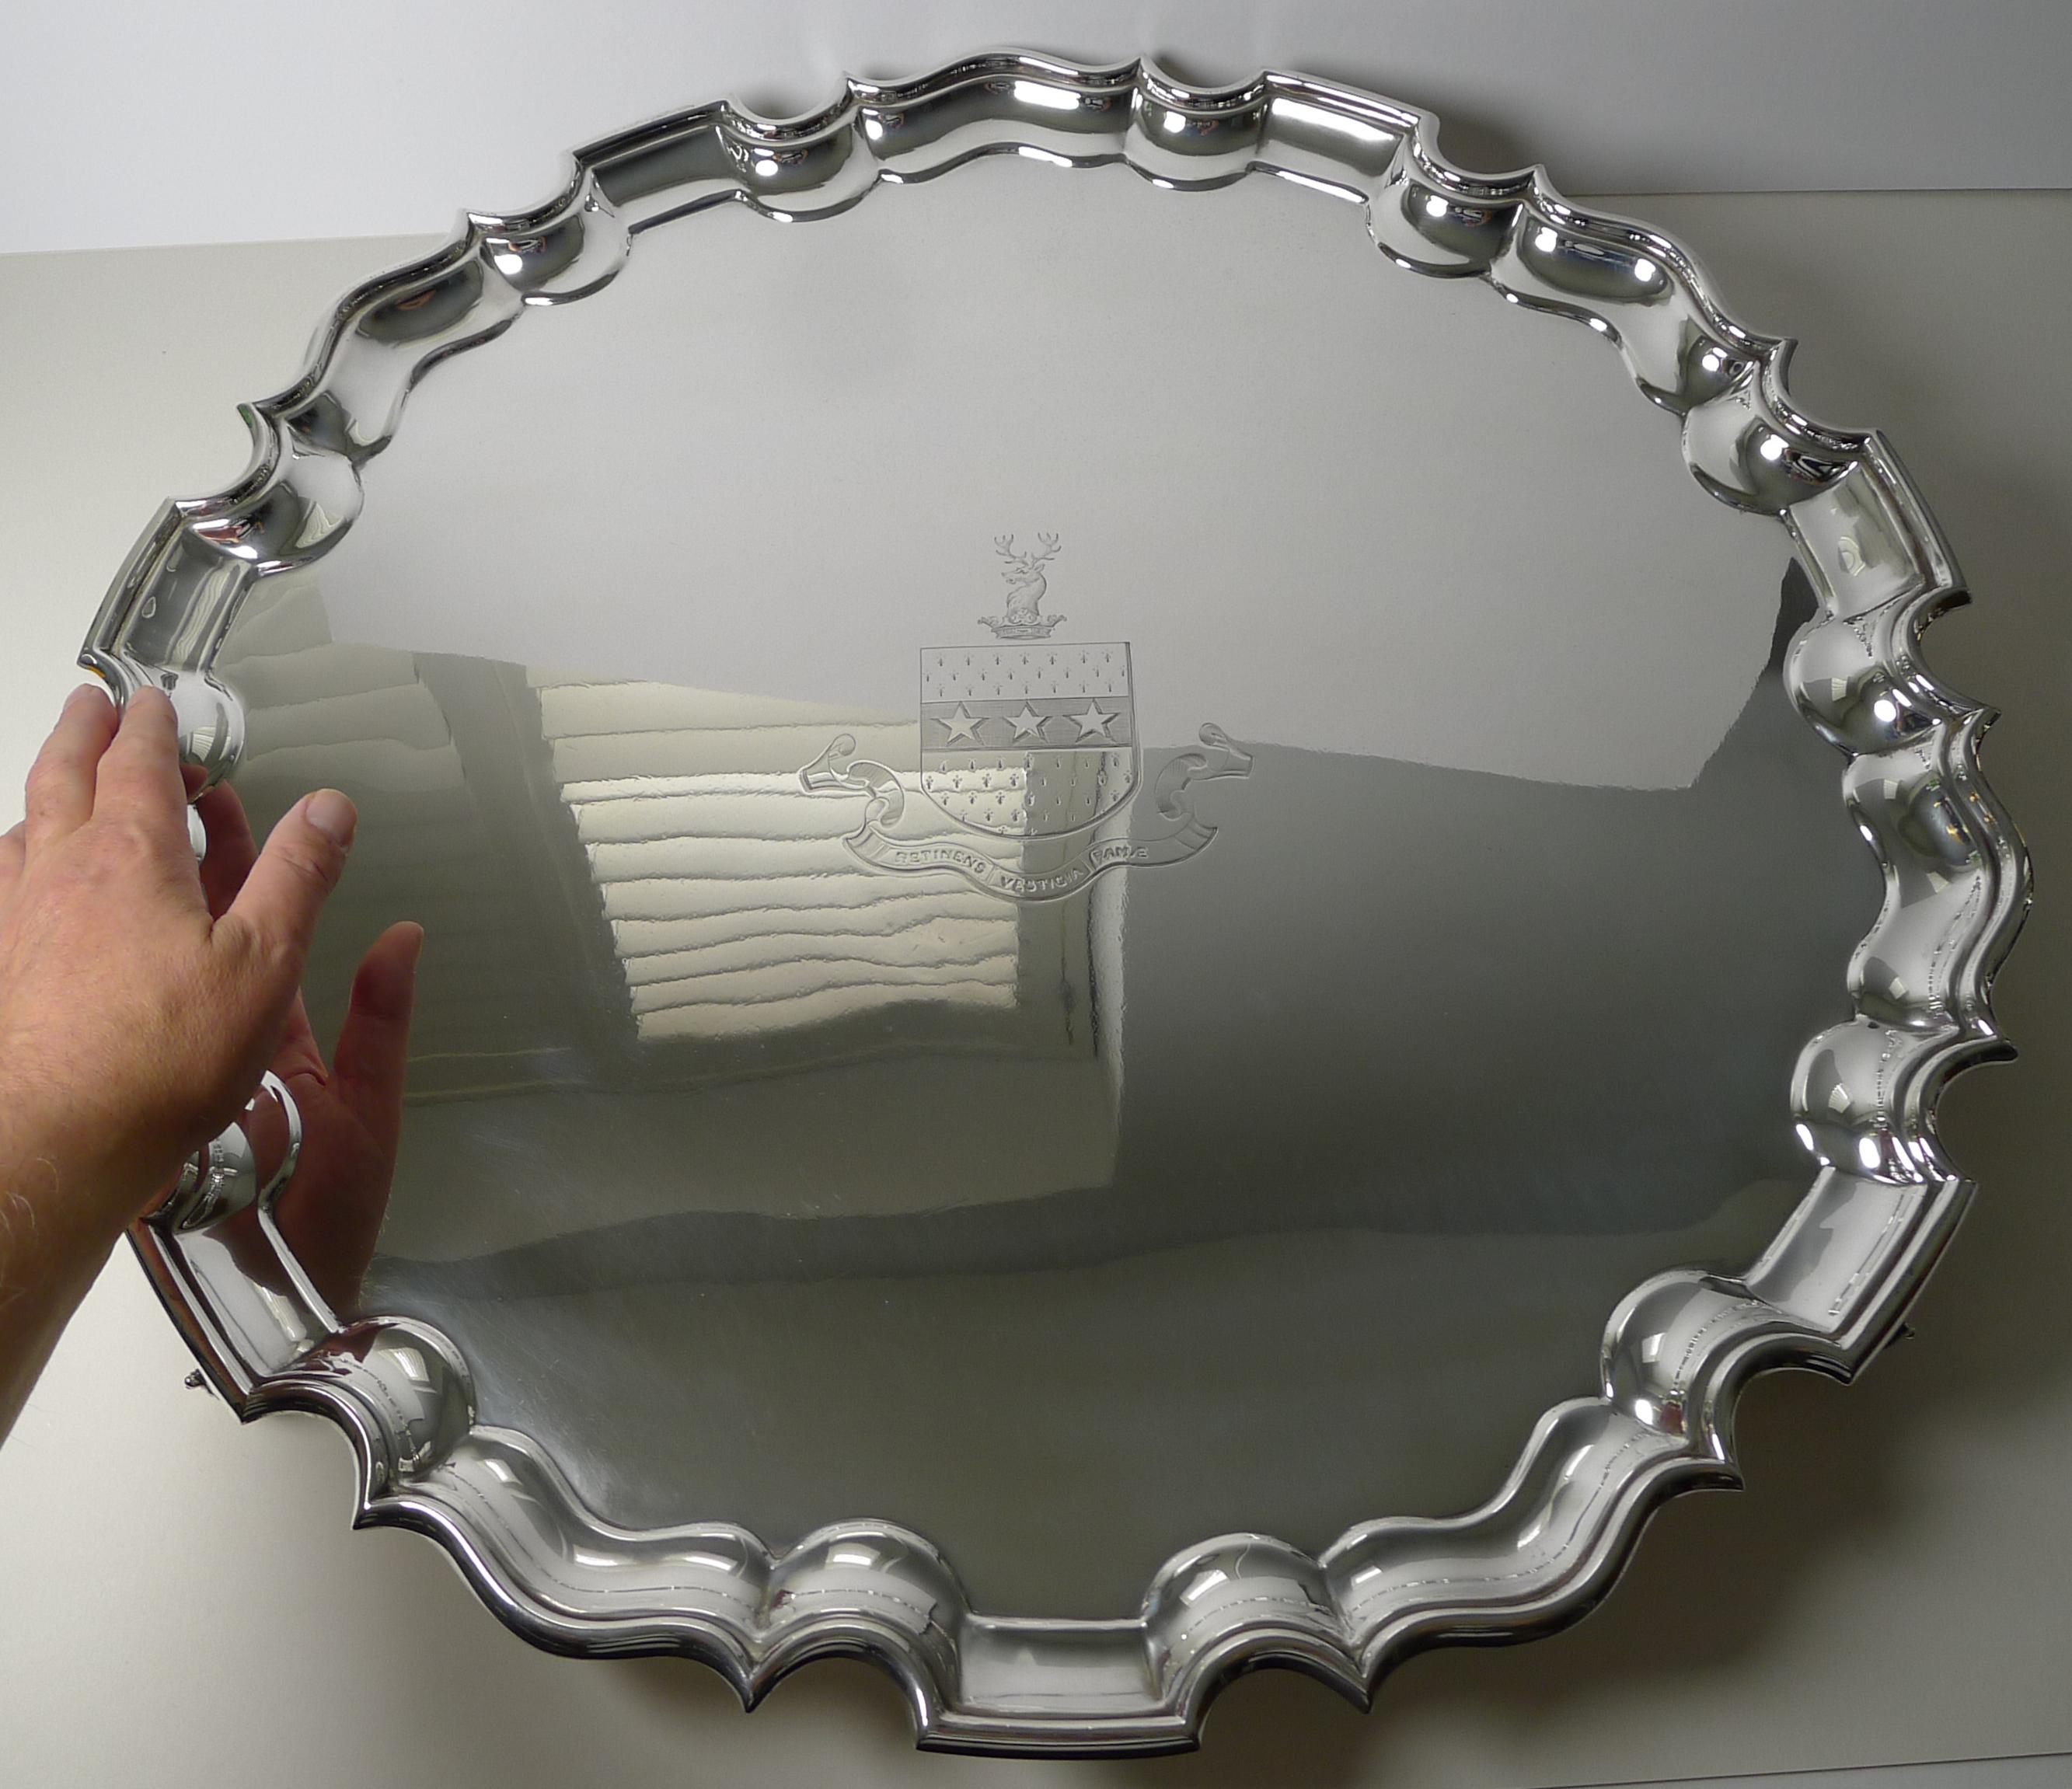 In all the years I have been in this business, I have never seen a salver / tray of this size, it's the most impressive centrepiece by the creme de la creme of silversmith's, 